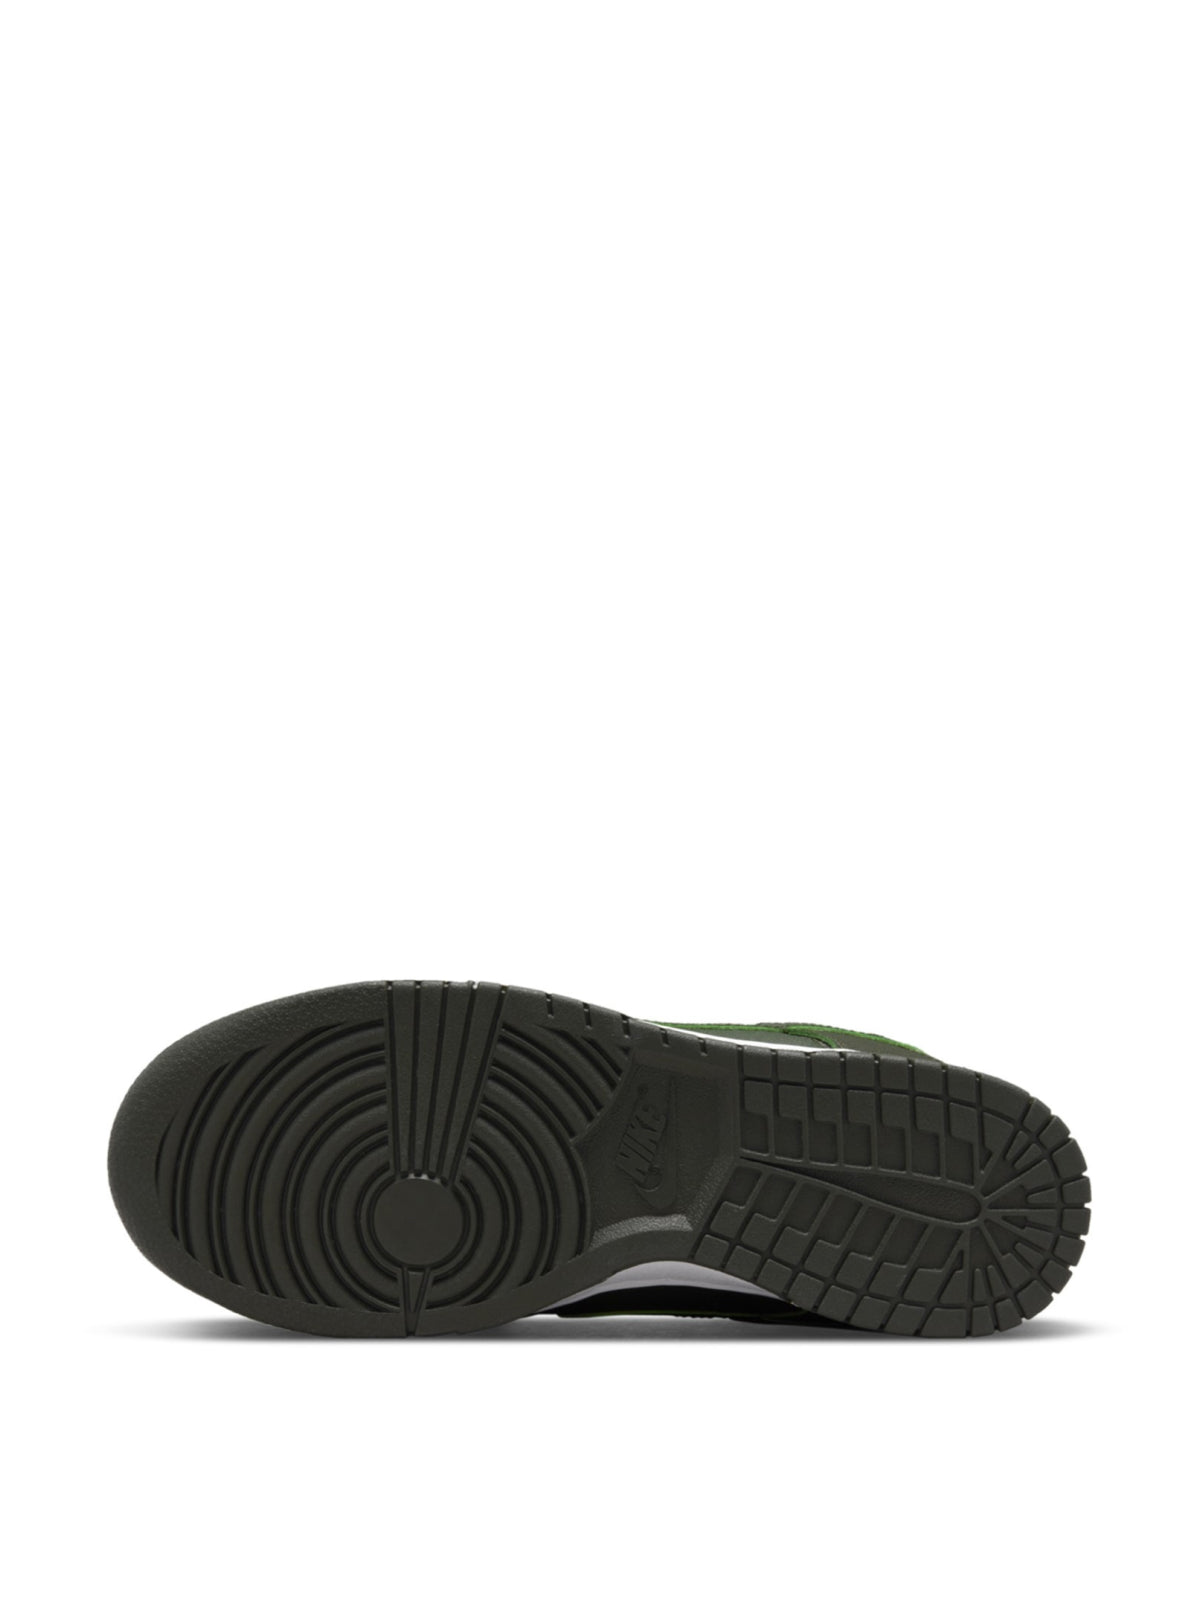 Nike-OUTLET-SALE-Dunk Low Avocado Sneakers-ARCHIVIST